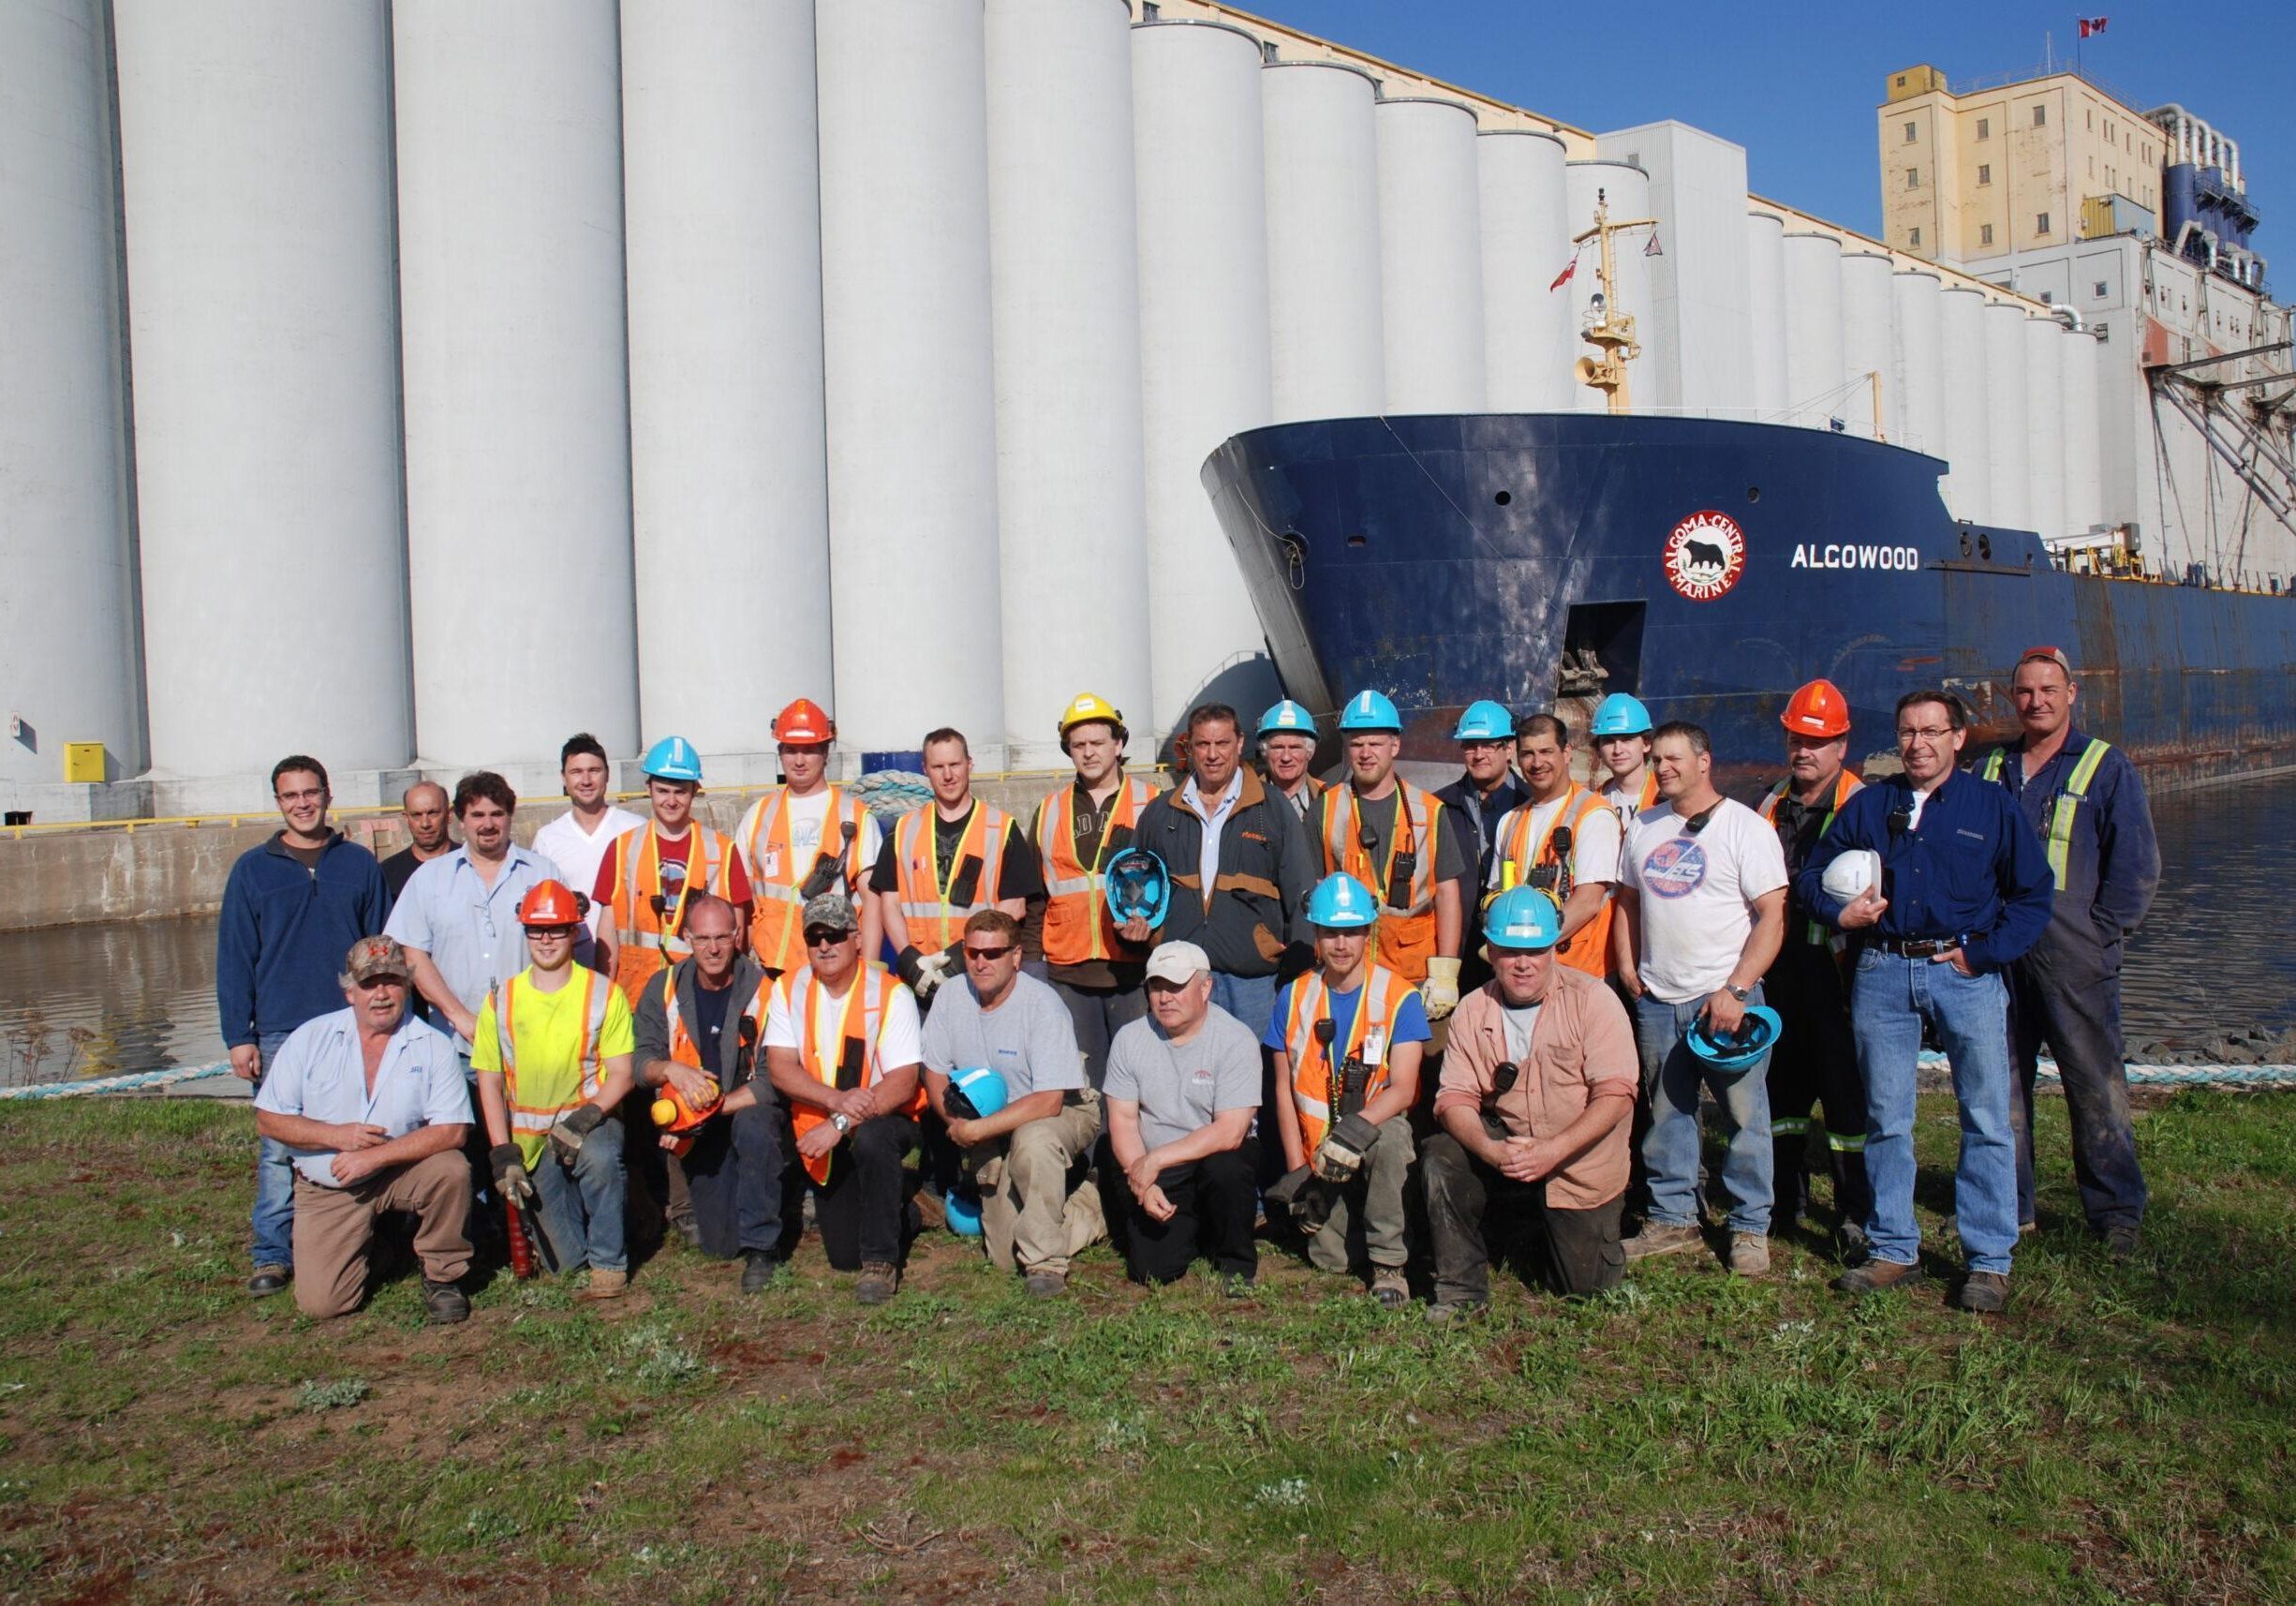 group image of over 20 people with hard-hats on in front of grain elevator